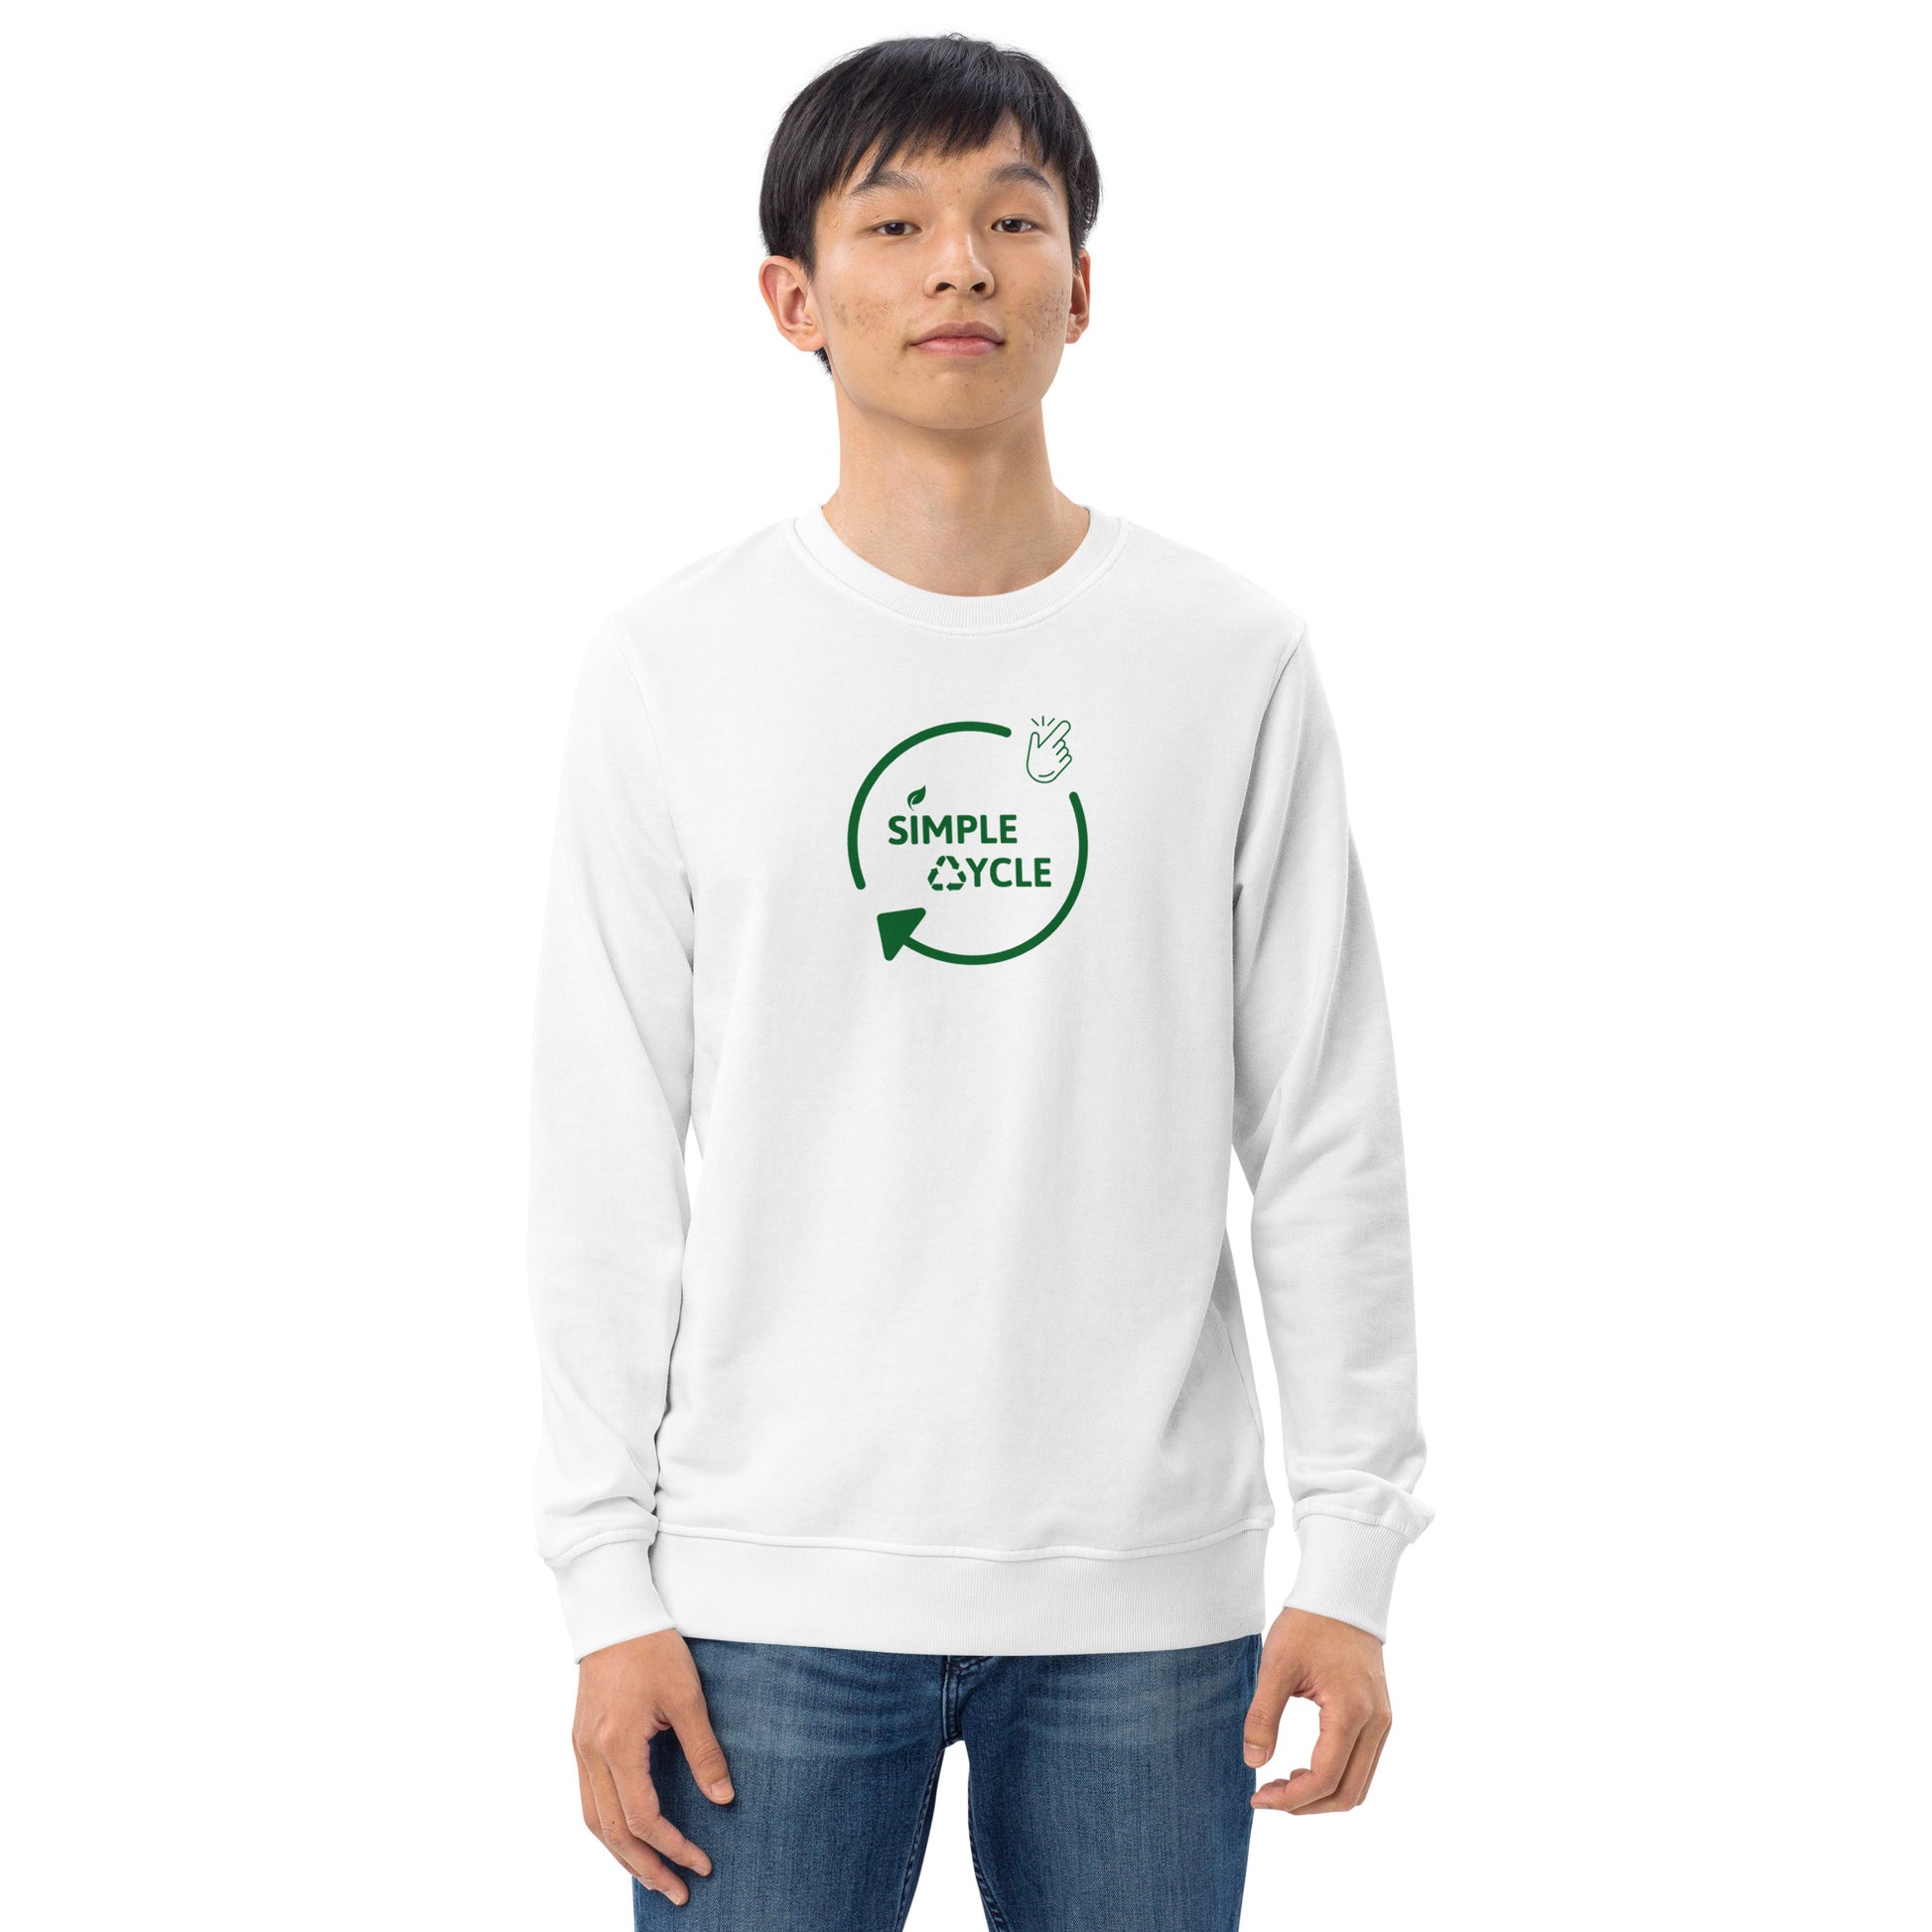 SimpleCycle Branded Unisex Organic Sweatshirt White front view